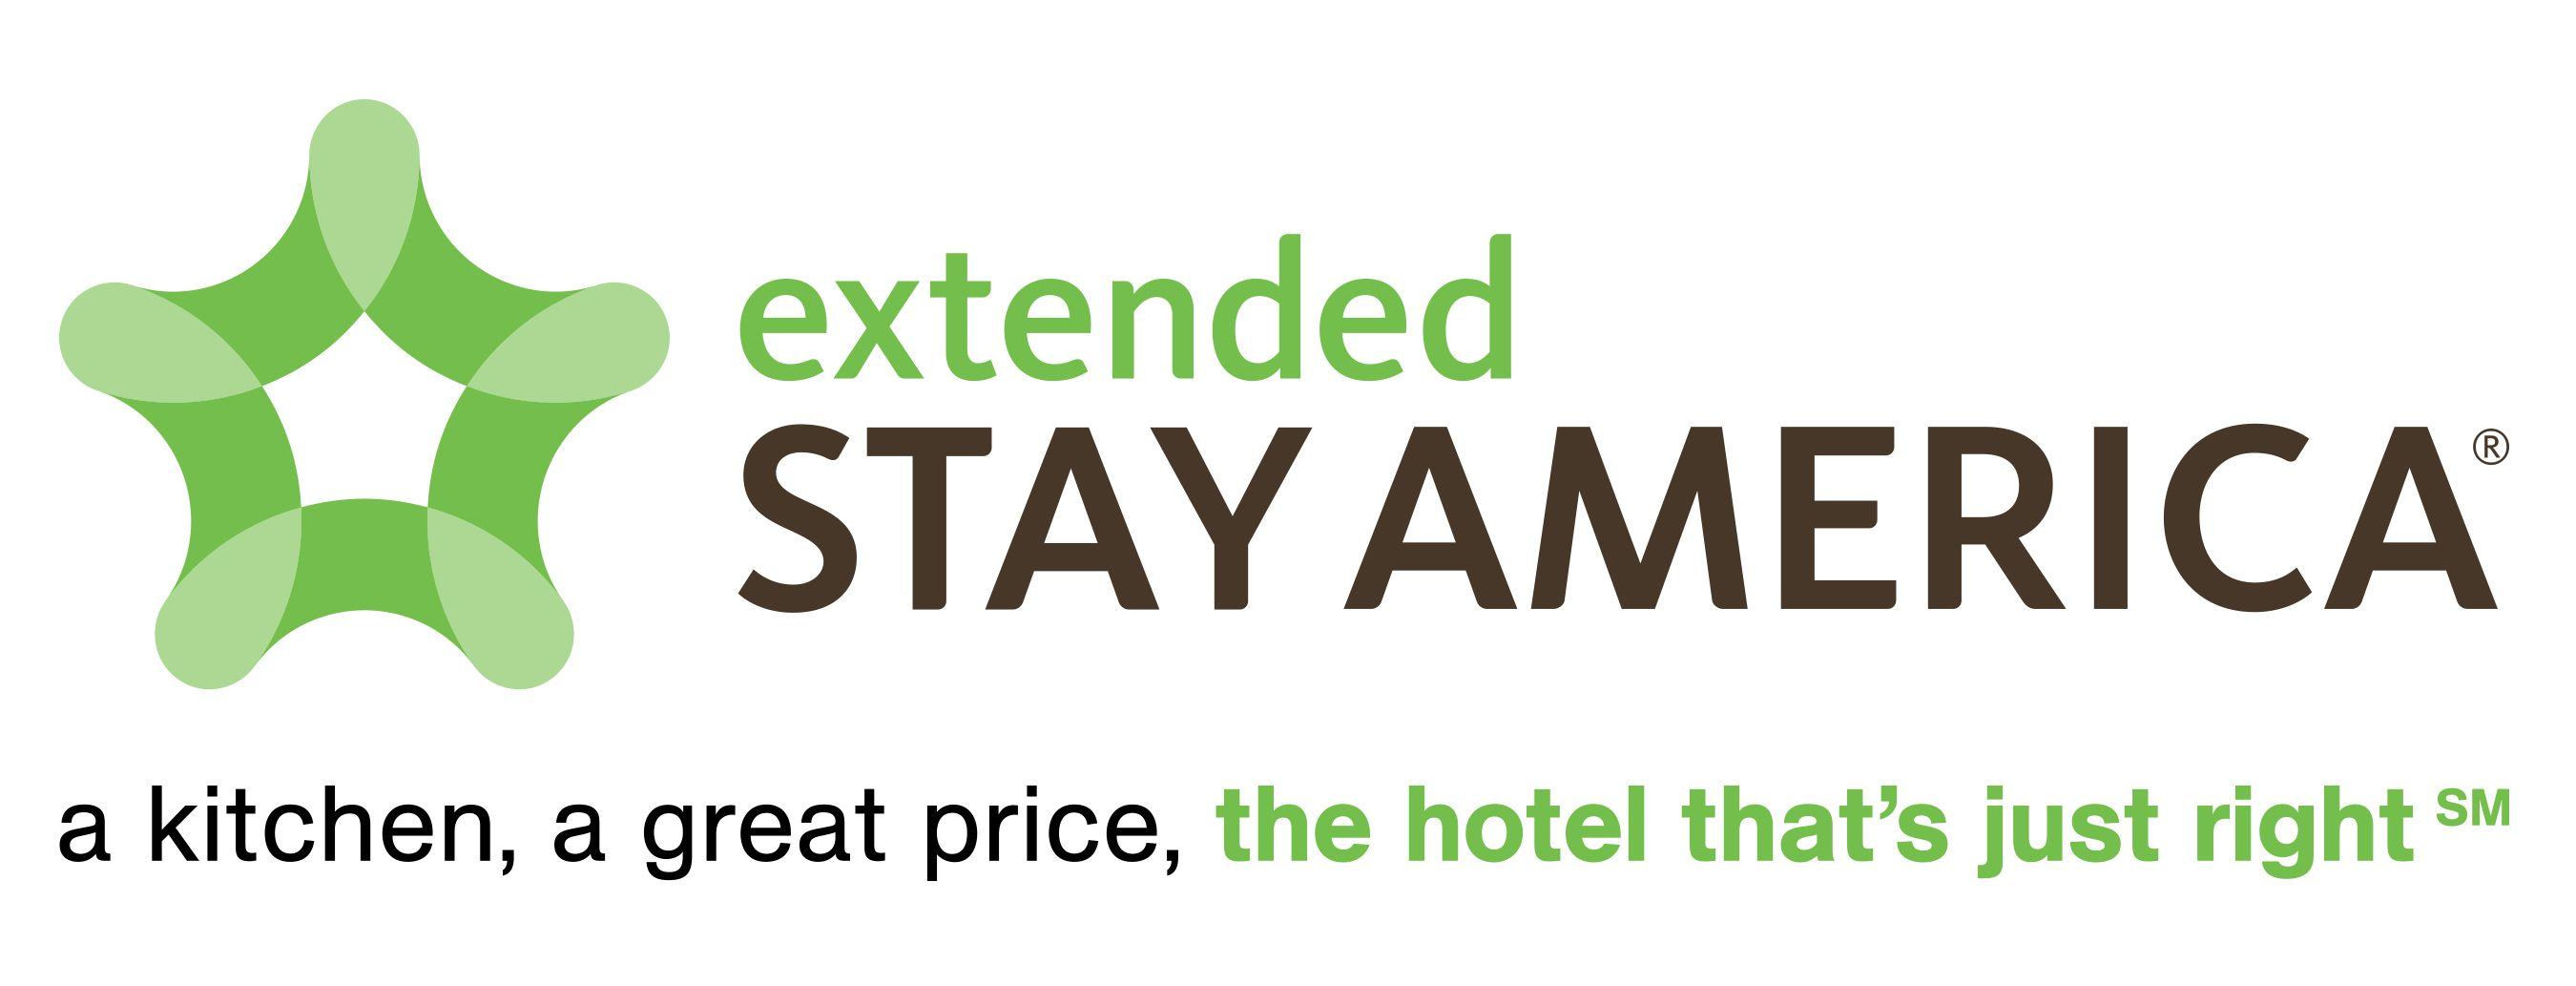 Extended Stay America Logo - Extended Stay America Shows Appreciation To Loyal Customers With ...